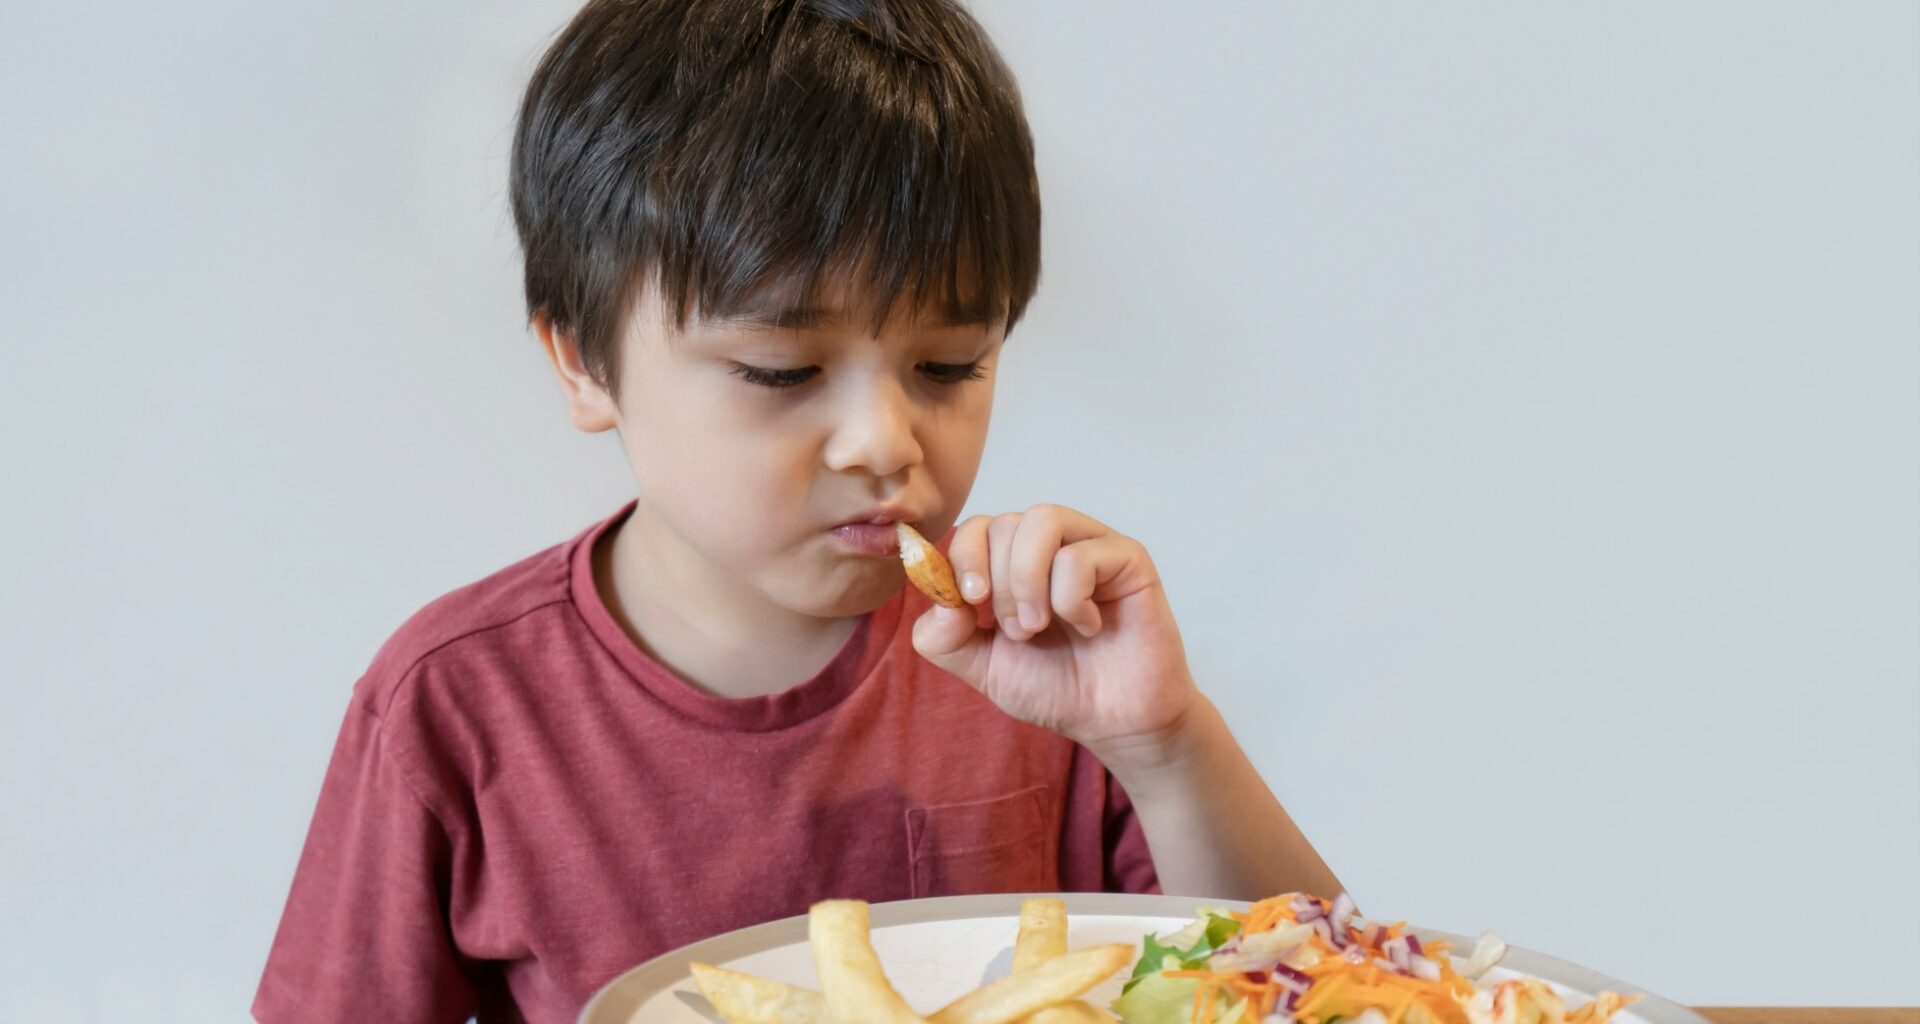 Can Toddlers Eat Medium Well Steak?